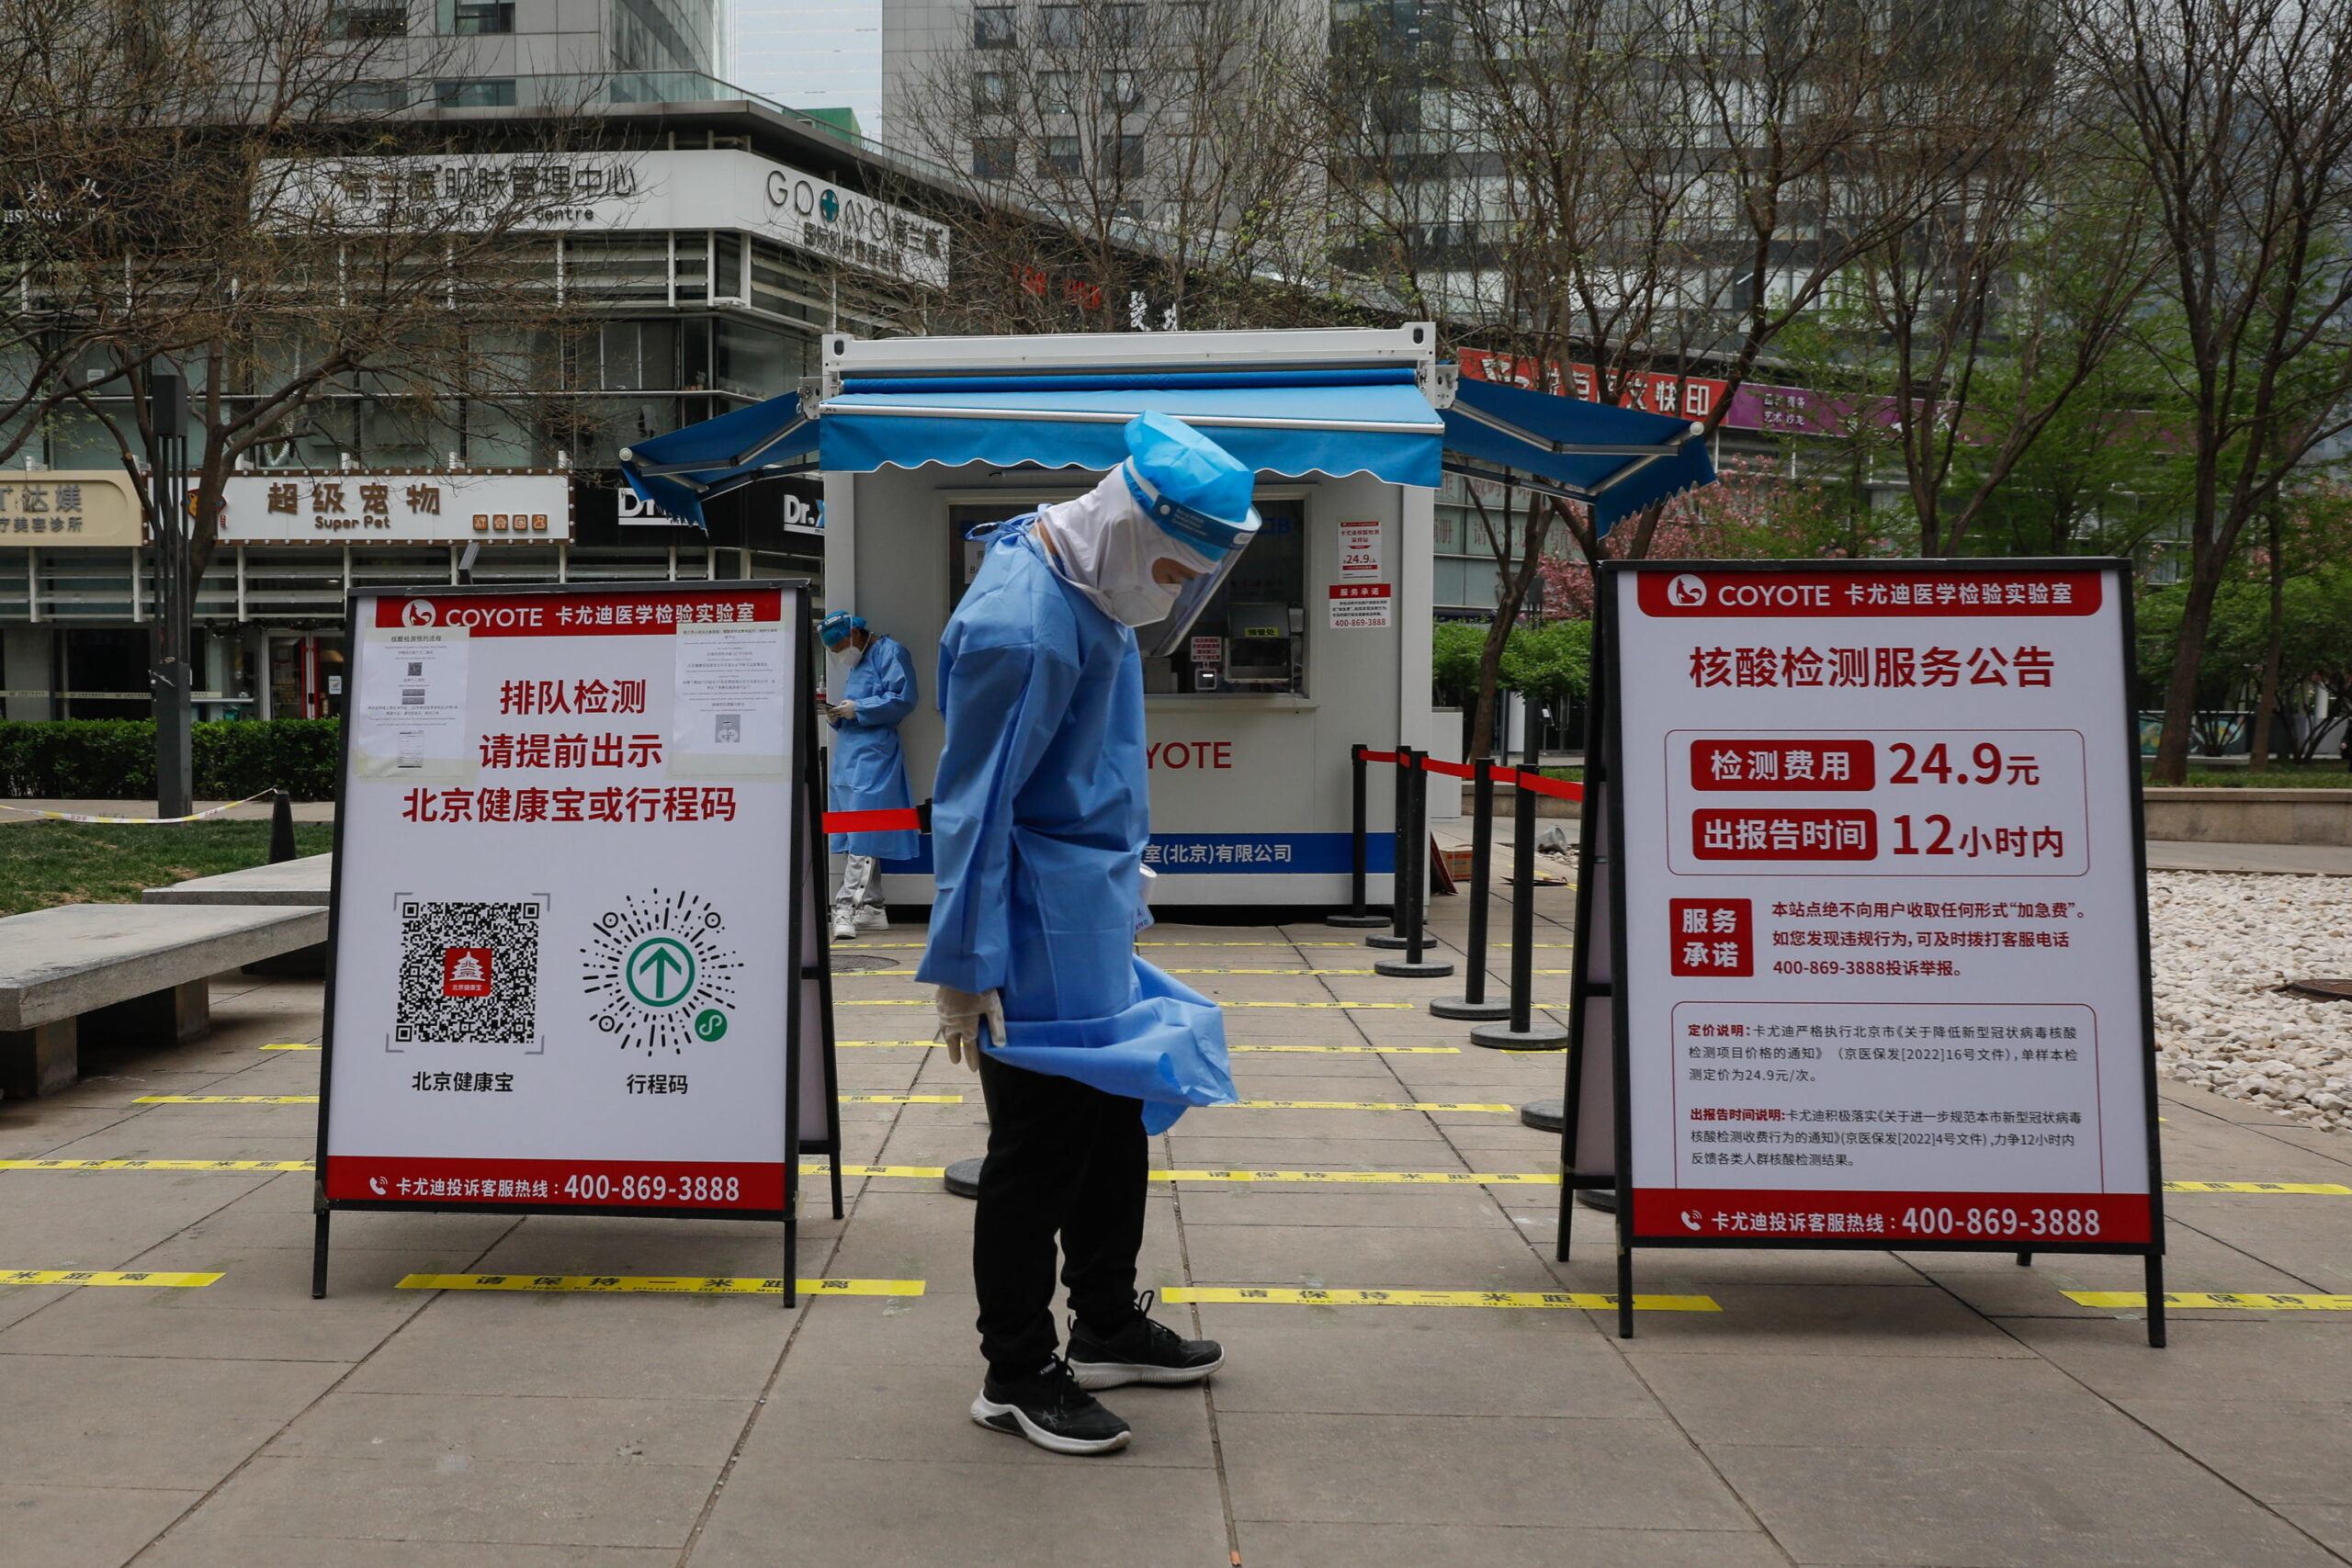 A health worker waits for people at a COVID-19 test site in Beijing, China, 11 April 2022. Shanghai recorded 26,087 new cases making it the fourth consecutive day recording more than 20,000 cases.  ANSA/MARK R. CRISTINO